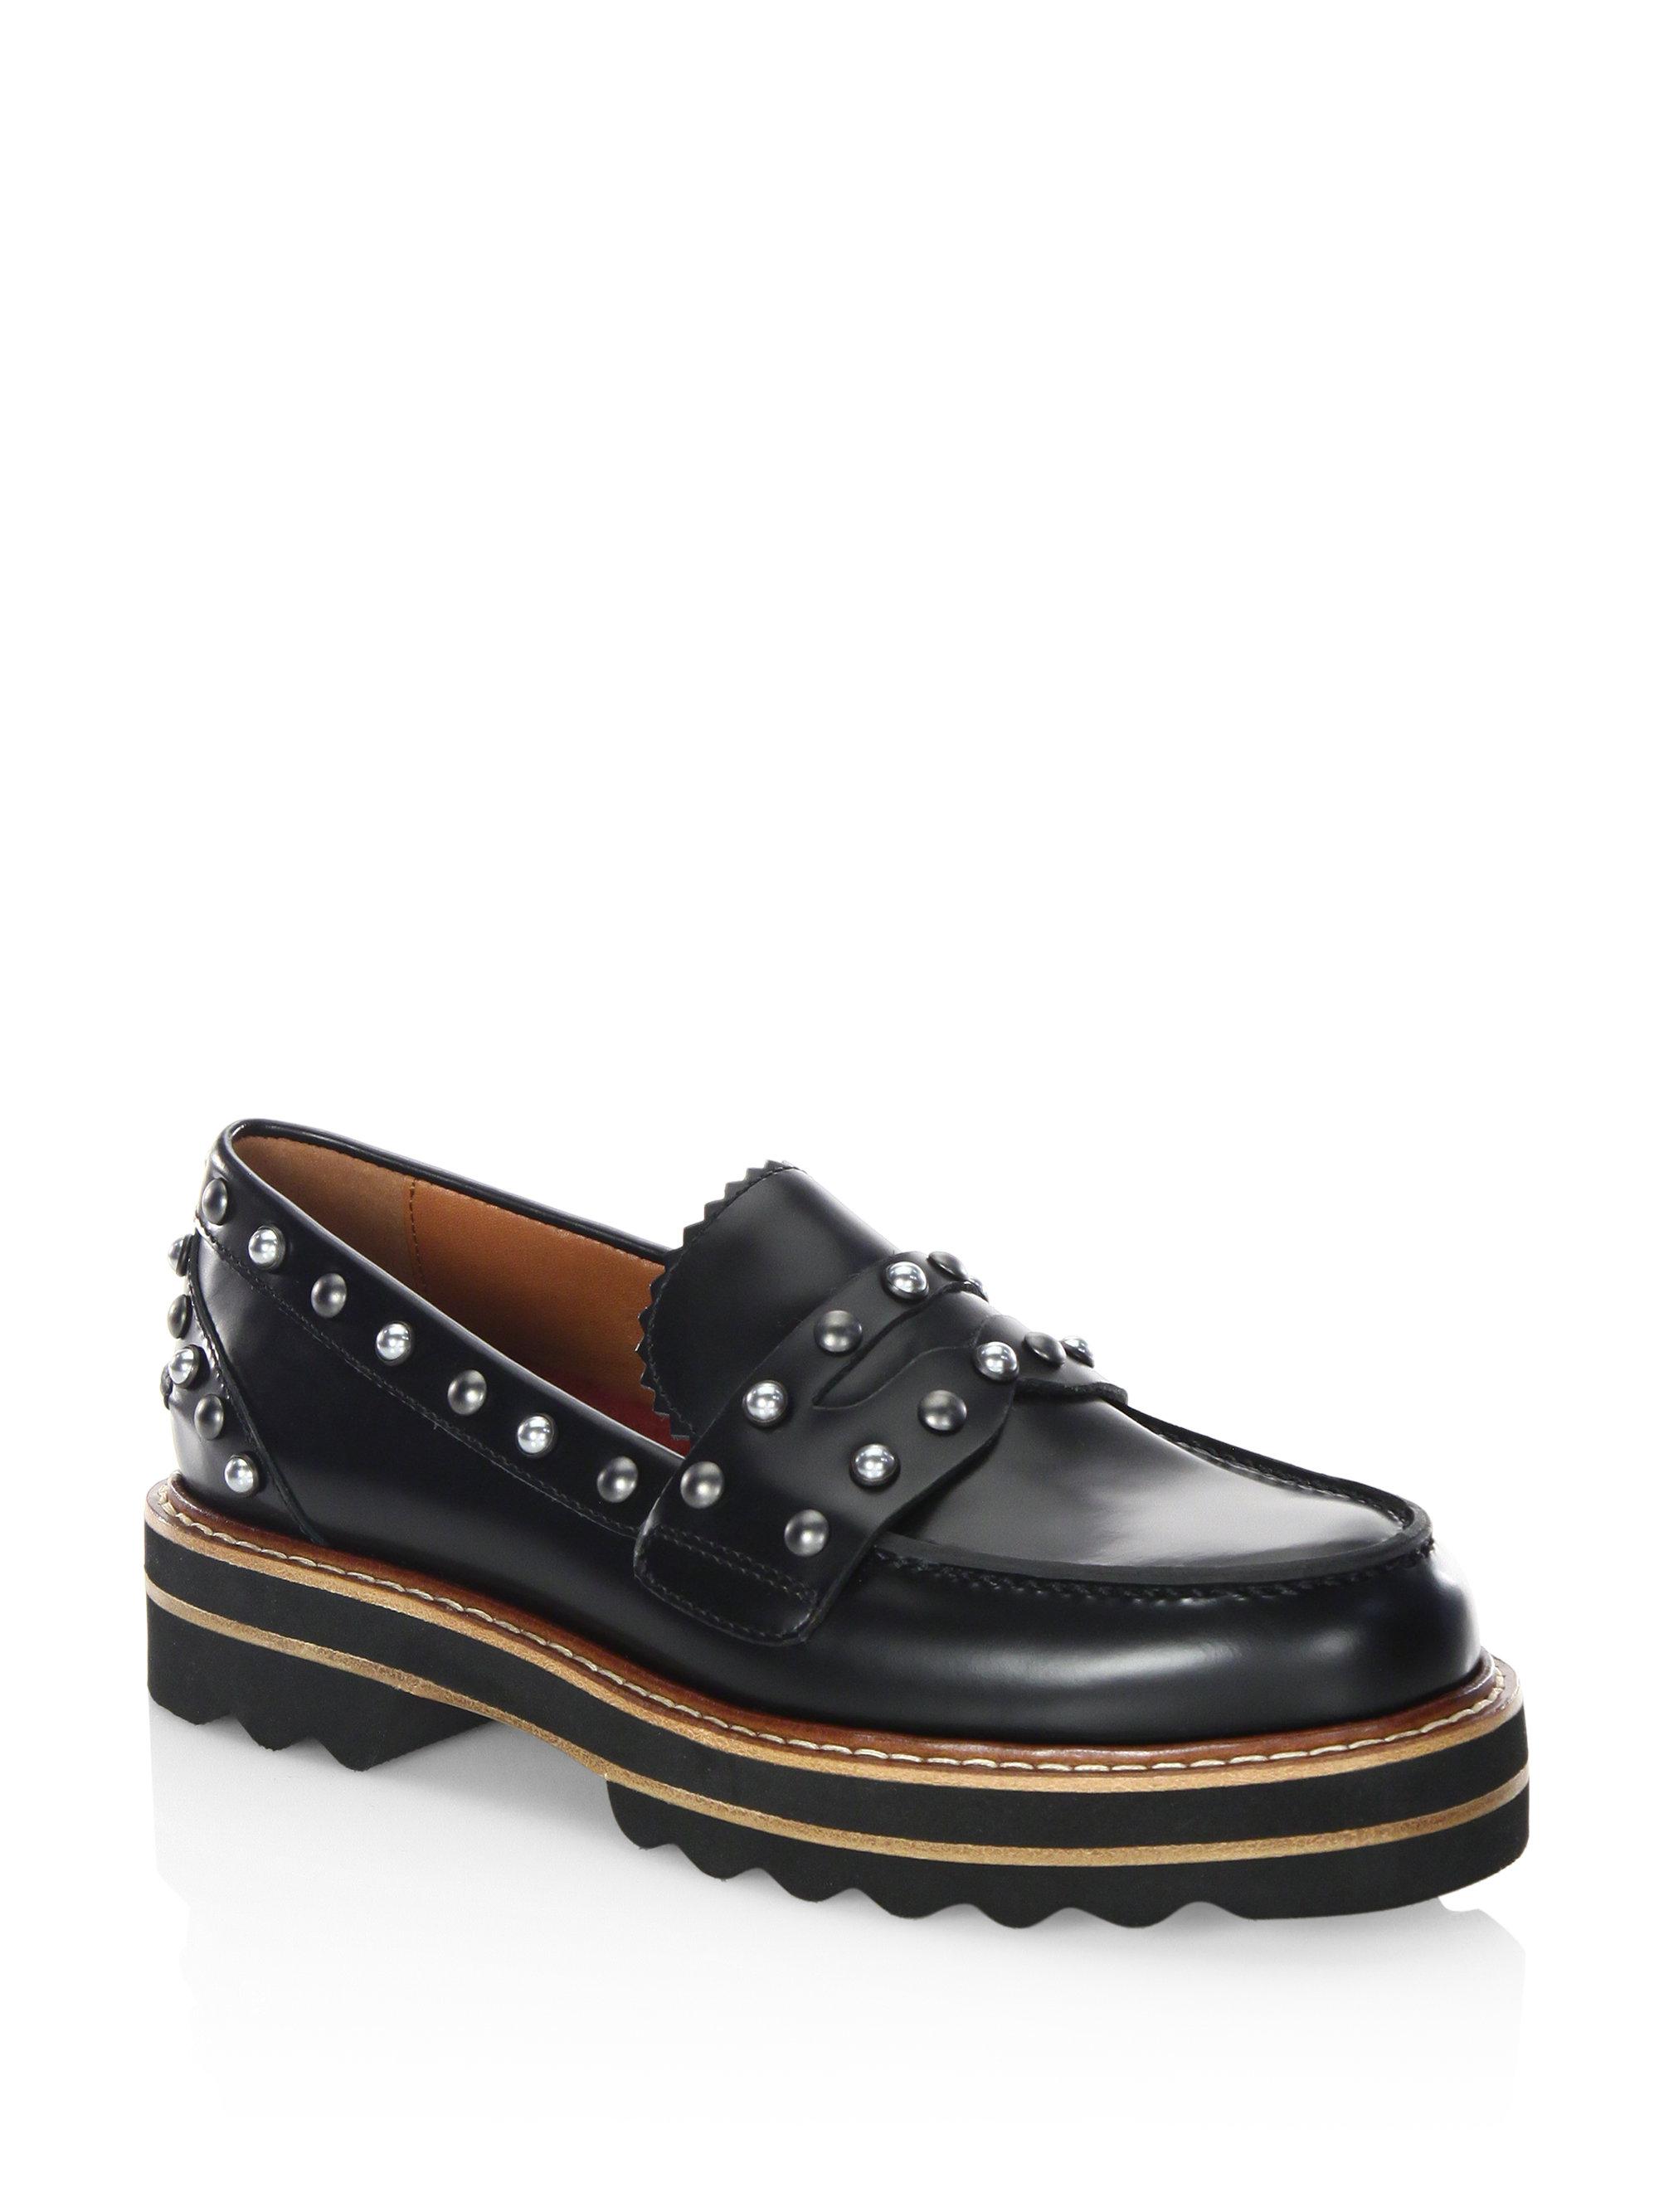 COACH Lenox Studded Leather & Shearling Platform Loafers in Black | Lyst